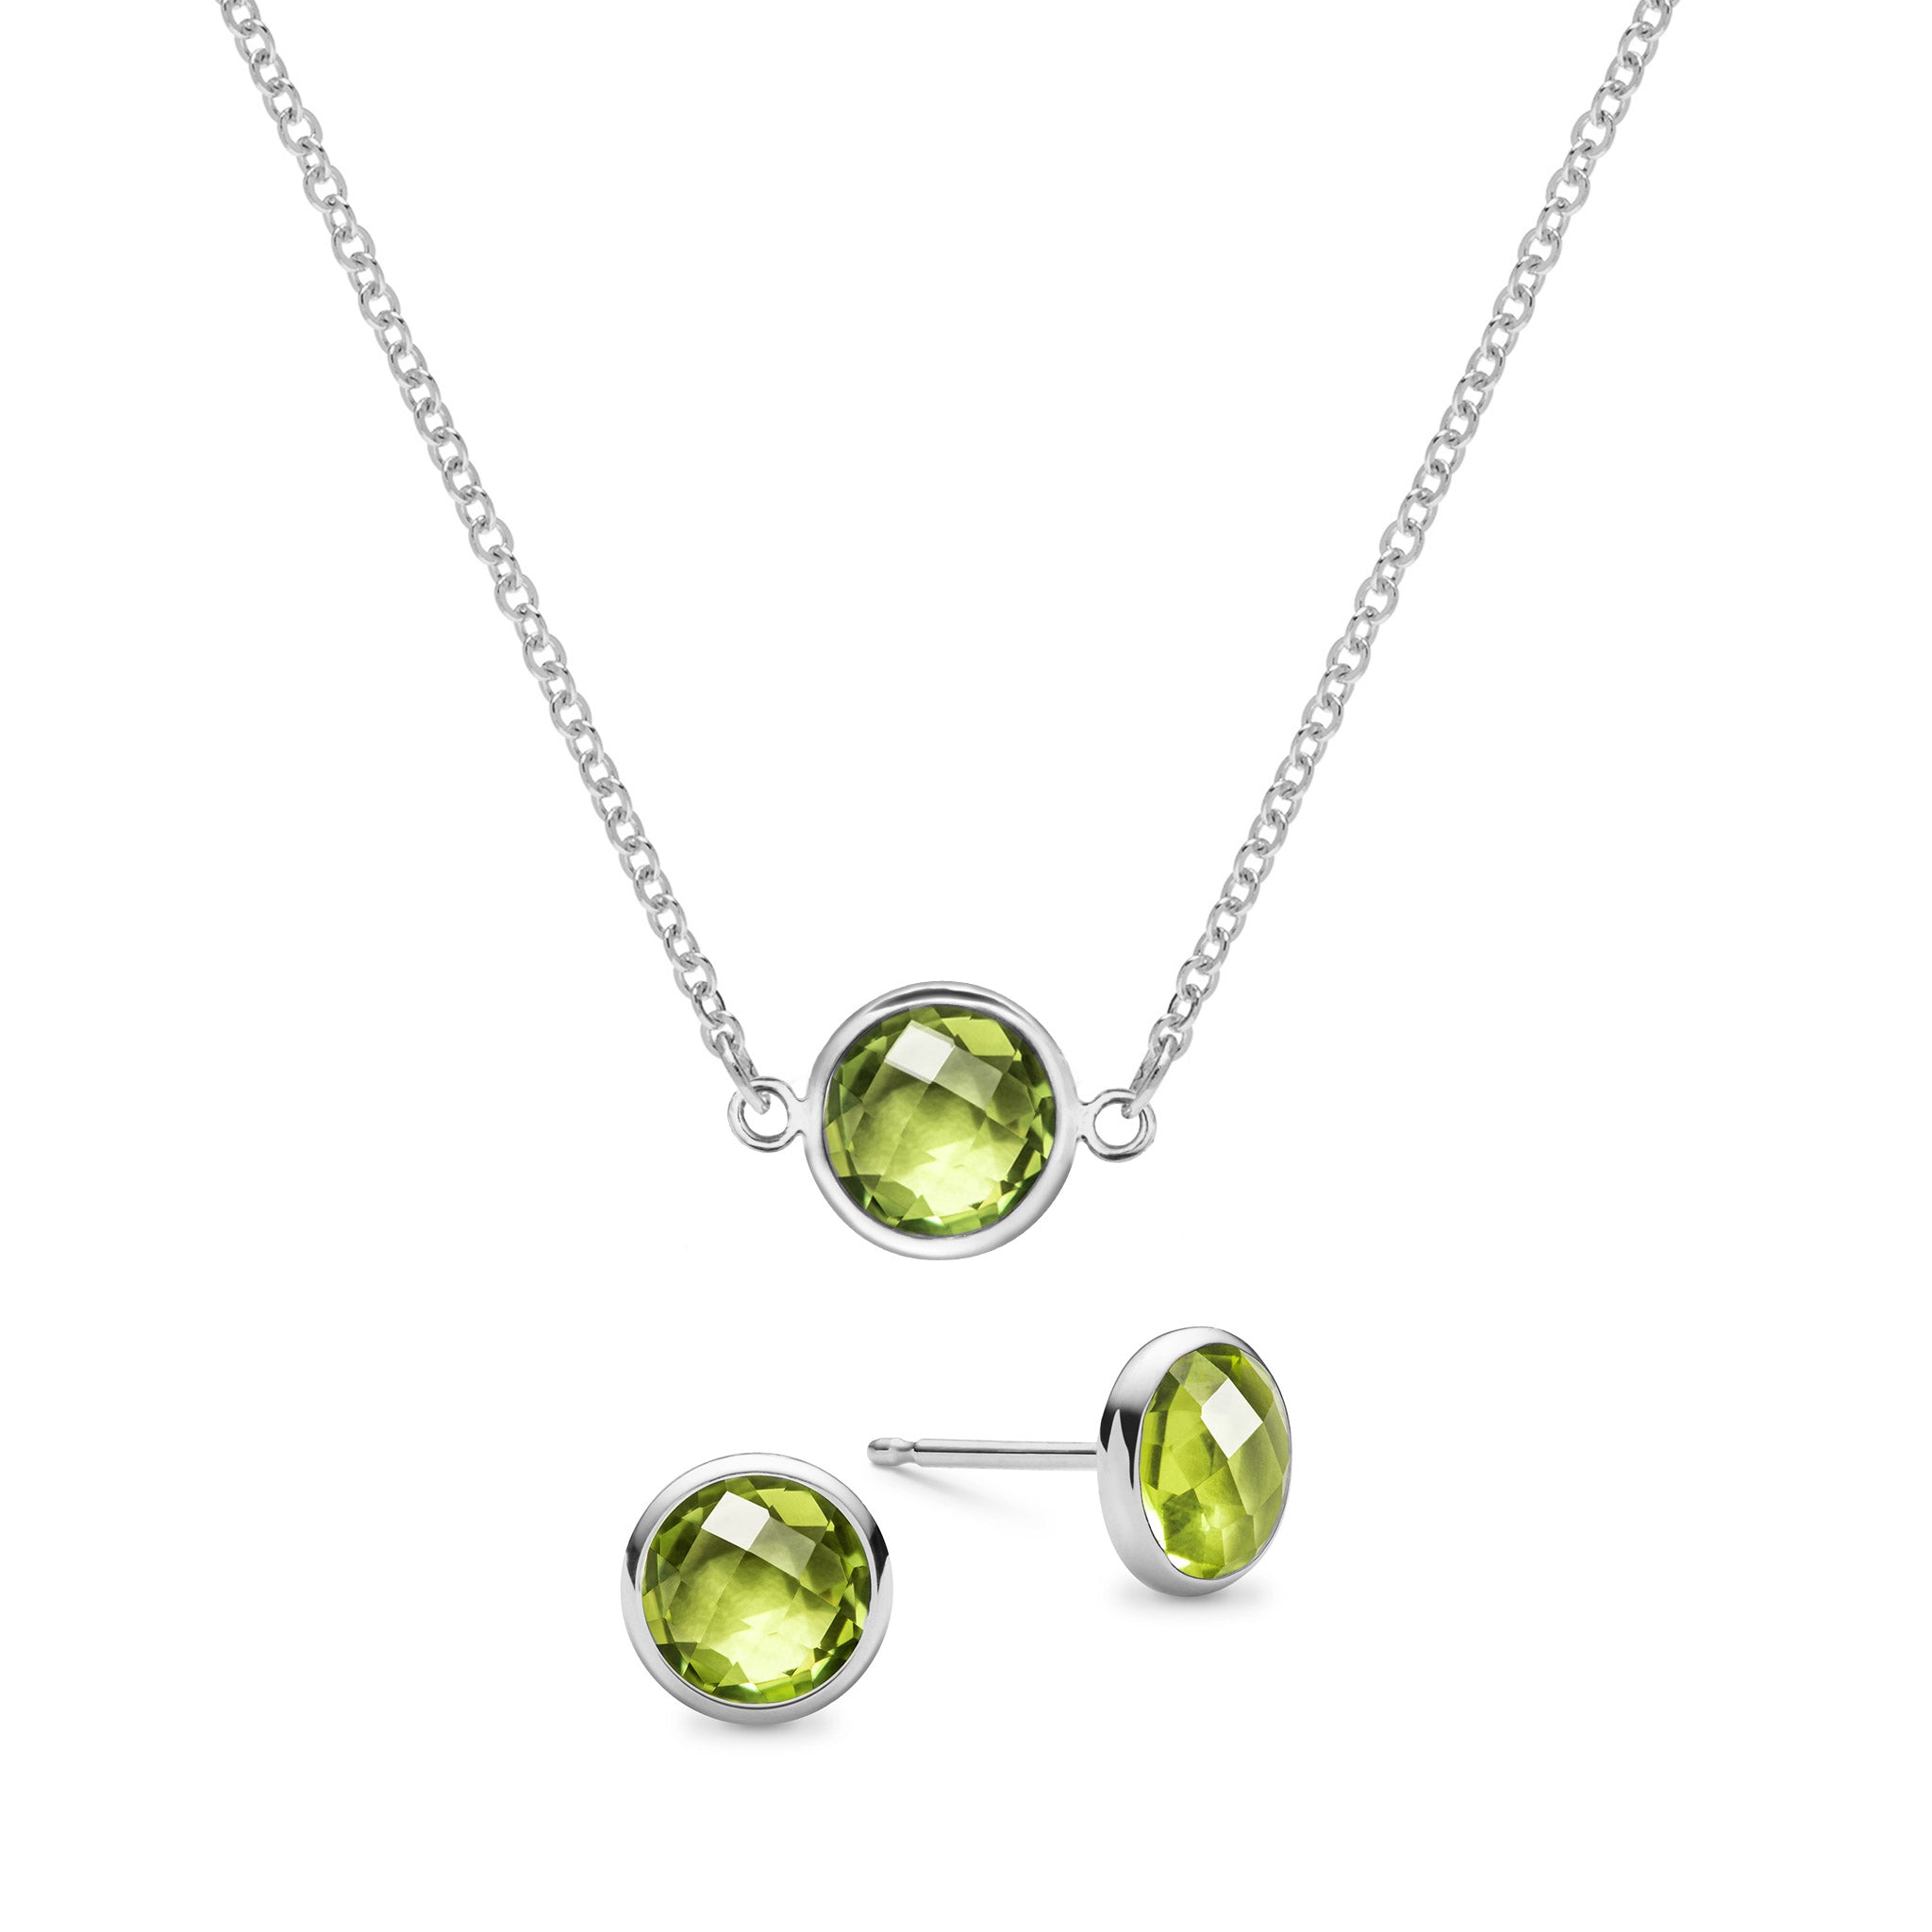 Grand 1 Peridot Necklace and Earrings Set in 14k Gold (August) - 14k White  Gold / X-Small (15